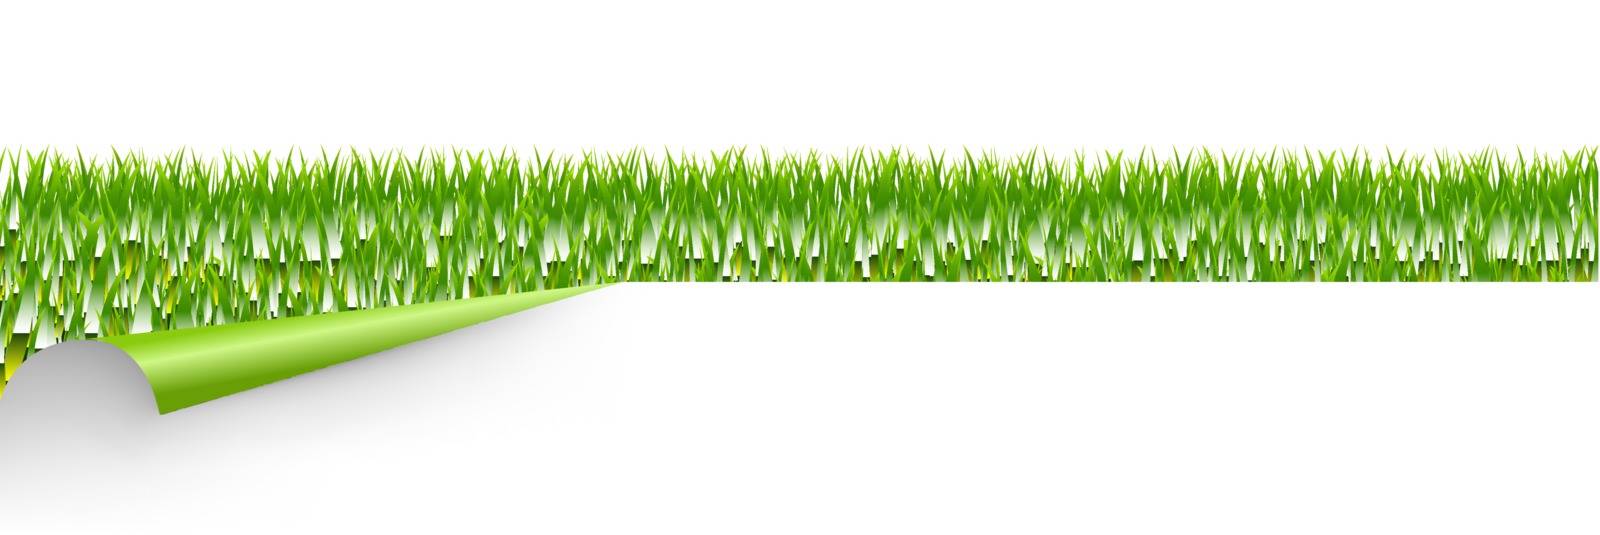 Green Grass With Green Corner by barbaliss